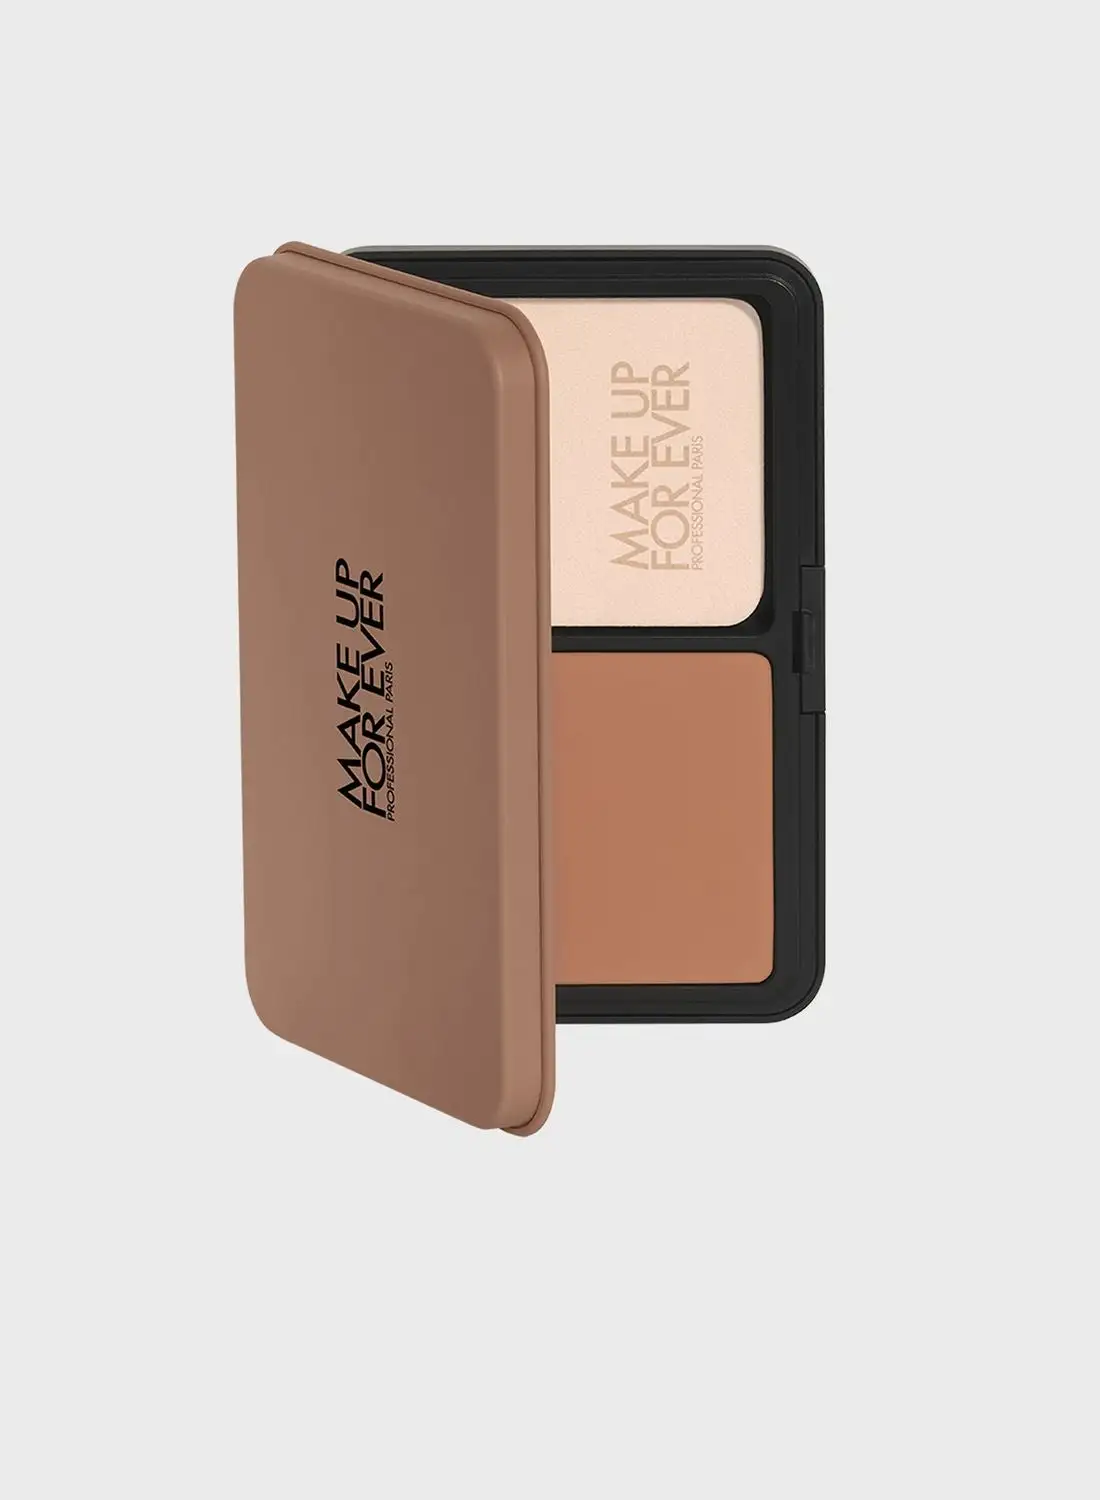 MAKE UP FOR EVER Hd Skin Powder Foundation - 4R61 - Cool Almond